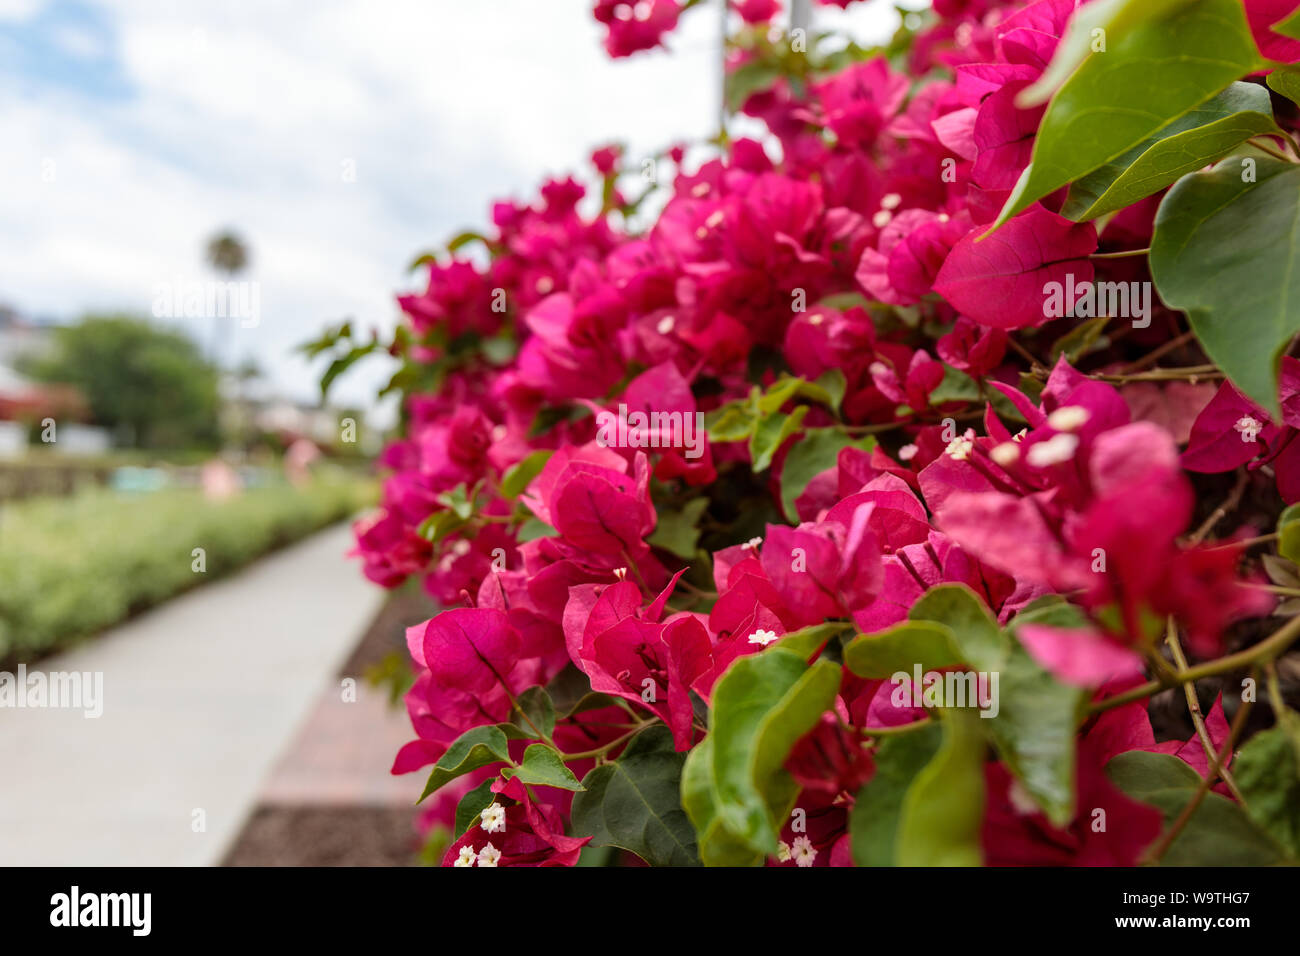 View of flowers at Venice Canals in CA, US Stock Photo